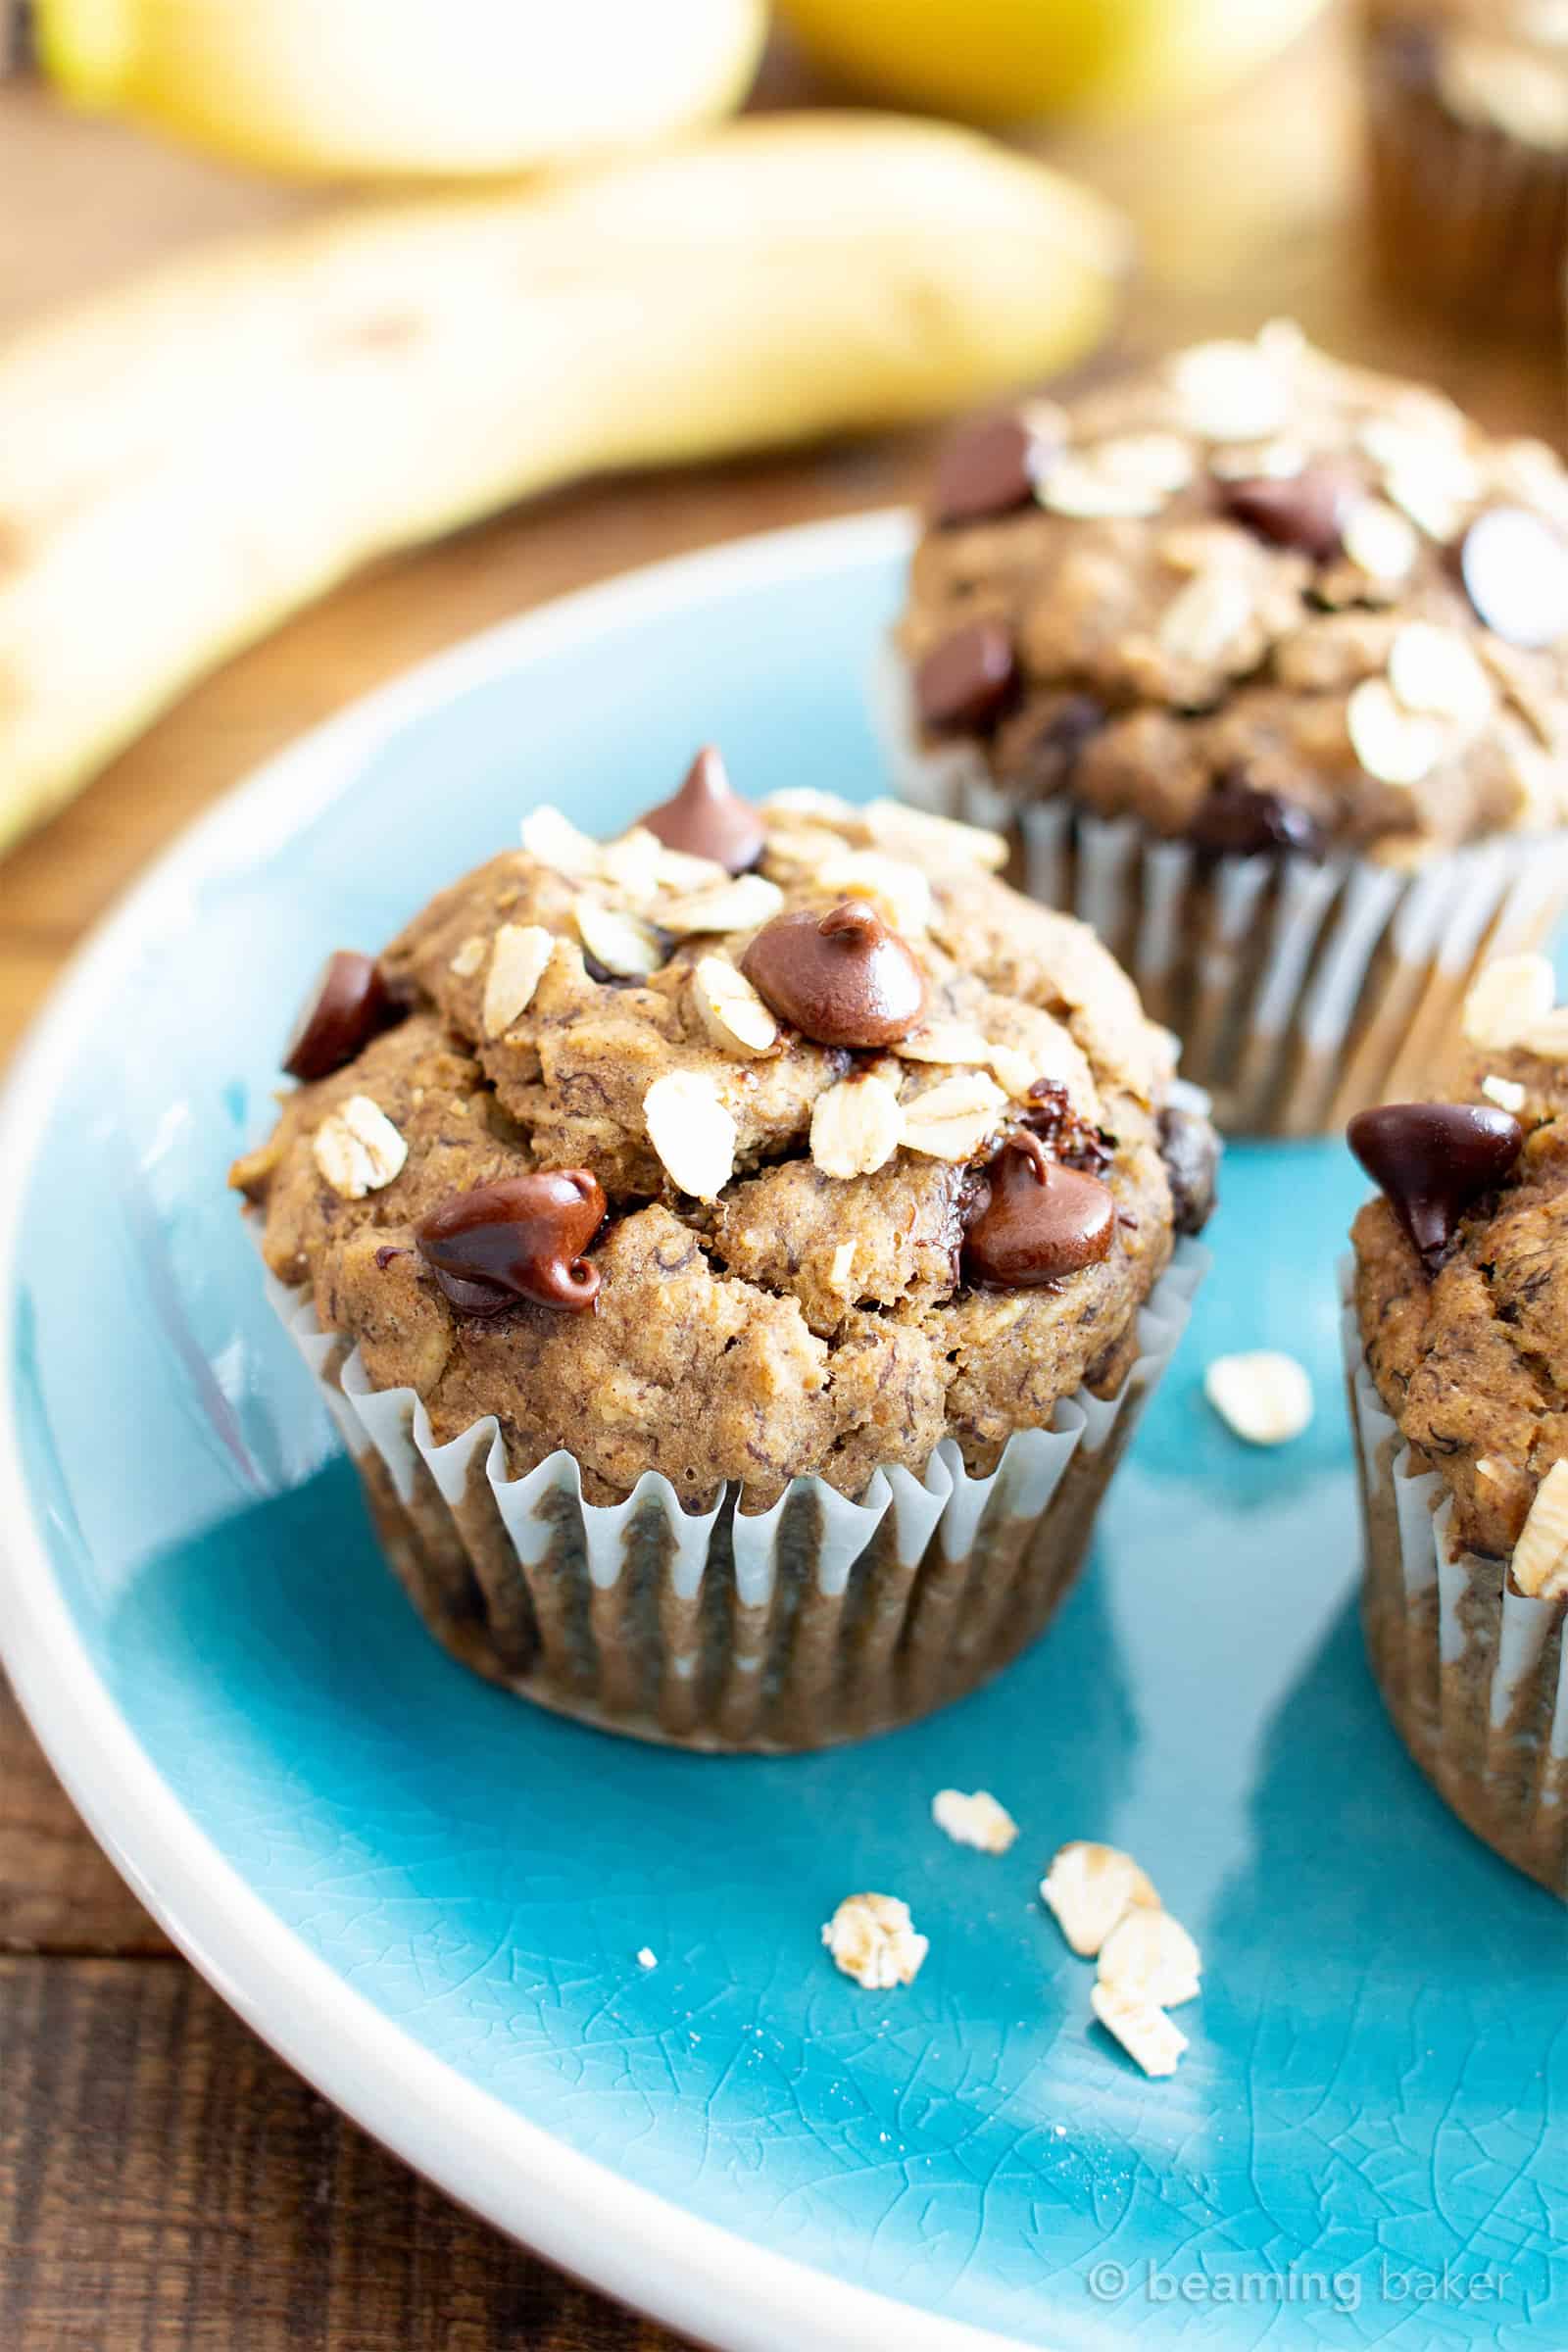 Banana Oatmeal Chocolate Chip Muffins (V, GF): a healthy 1-bowl recipe for moist, satisfying fresh-baked banana muffins bursting with hearty oats and decadent chocolate chips. #Bananas #Vegan #GlutenFree #Muffins #Healthy #Oats | Recipe at BeamingBaker.com